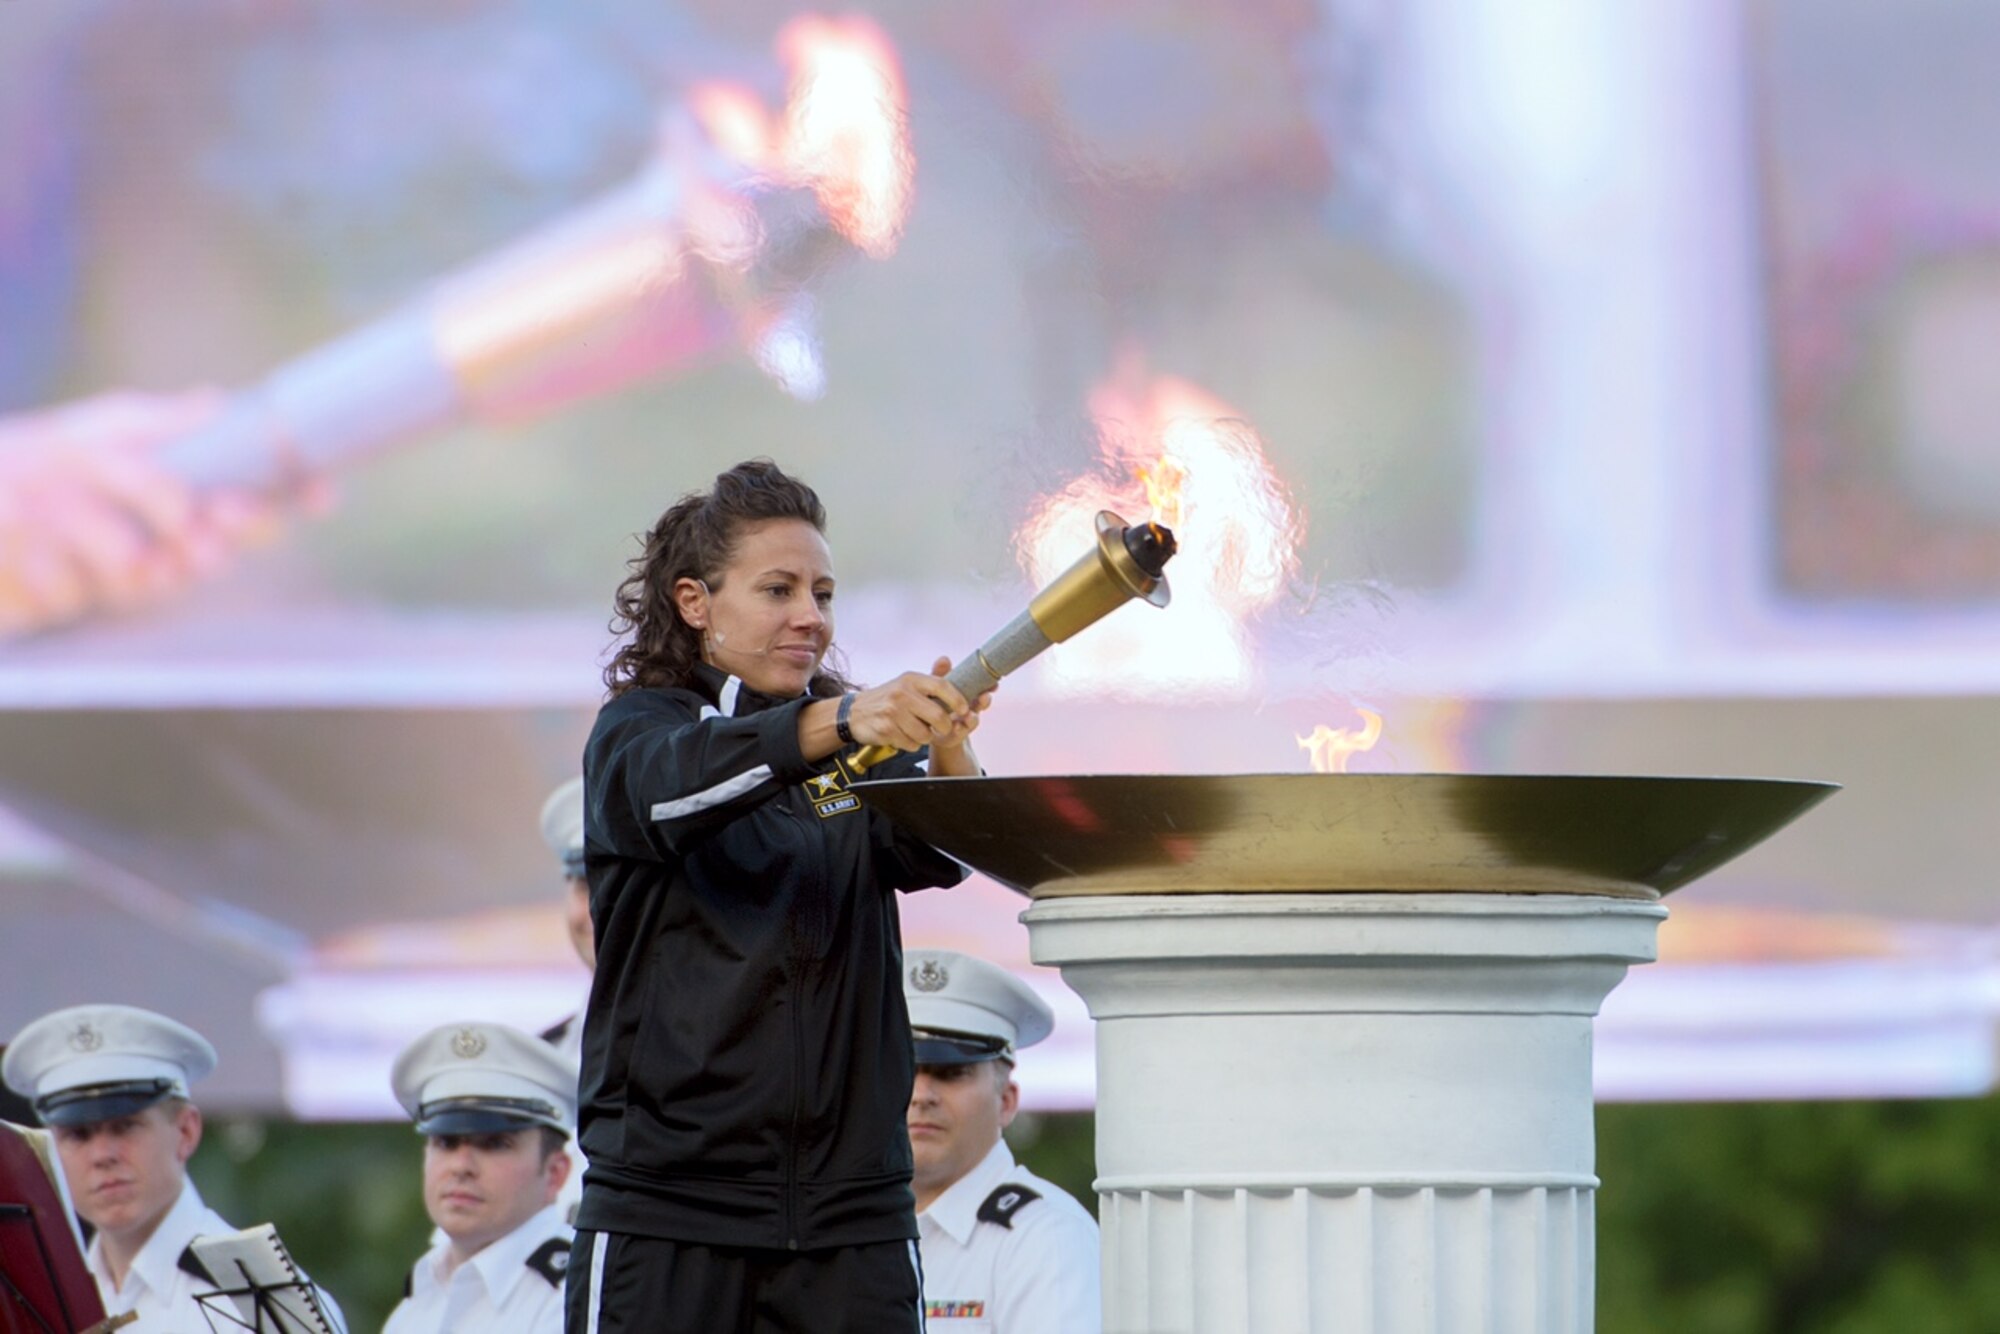 Army Capt. Kelly Elminger lights the 2016 Department of Defense Warrior Games torch during opening ceremonies for the games at the U.S. Military Academy in West Point, N.Y., June 15, 2016. (Department of Defense photo/EJ Hersom)